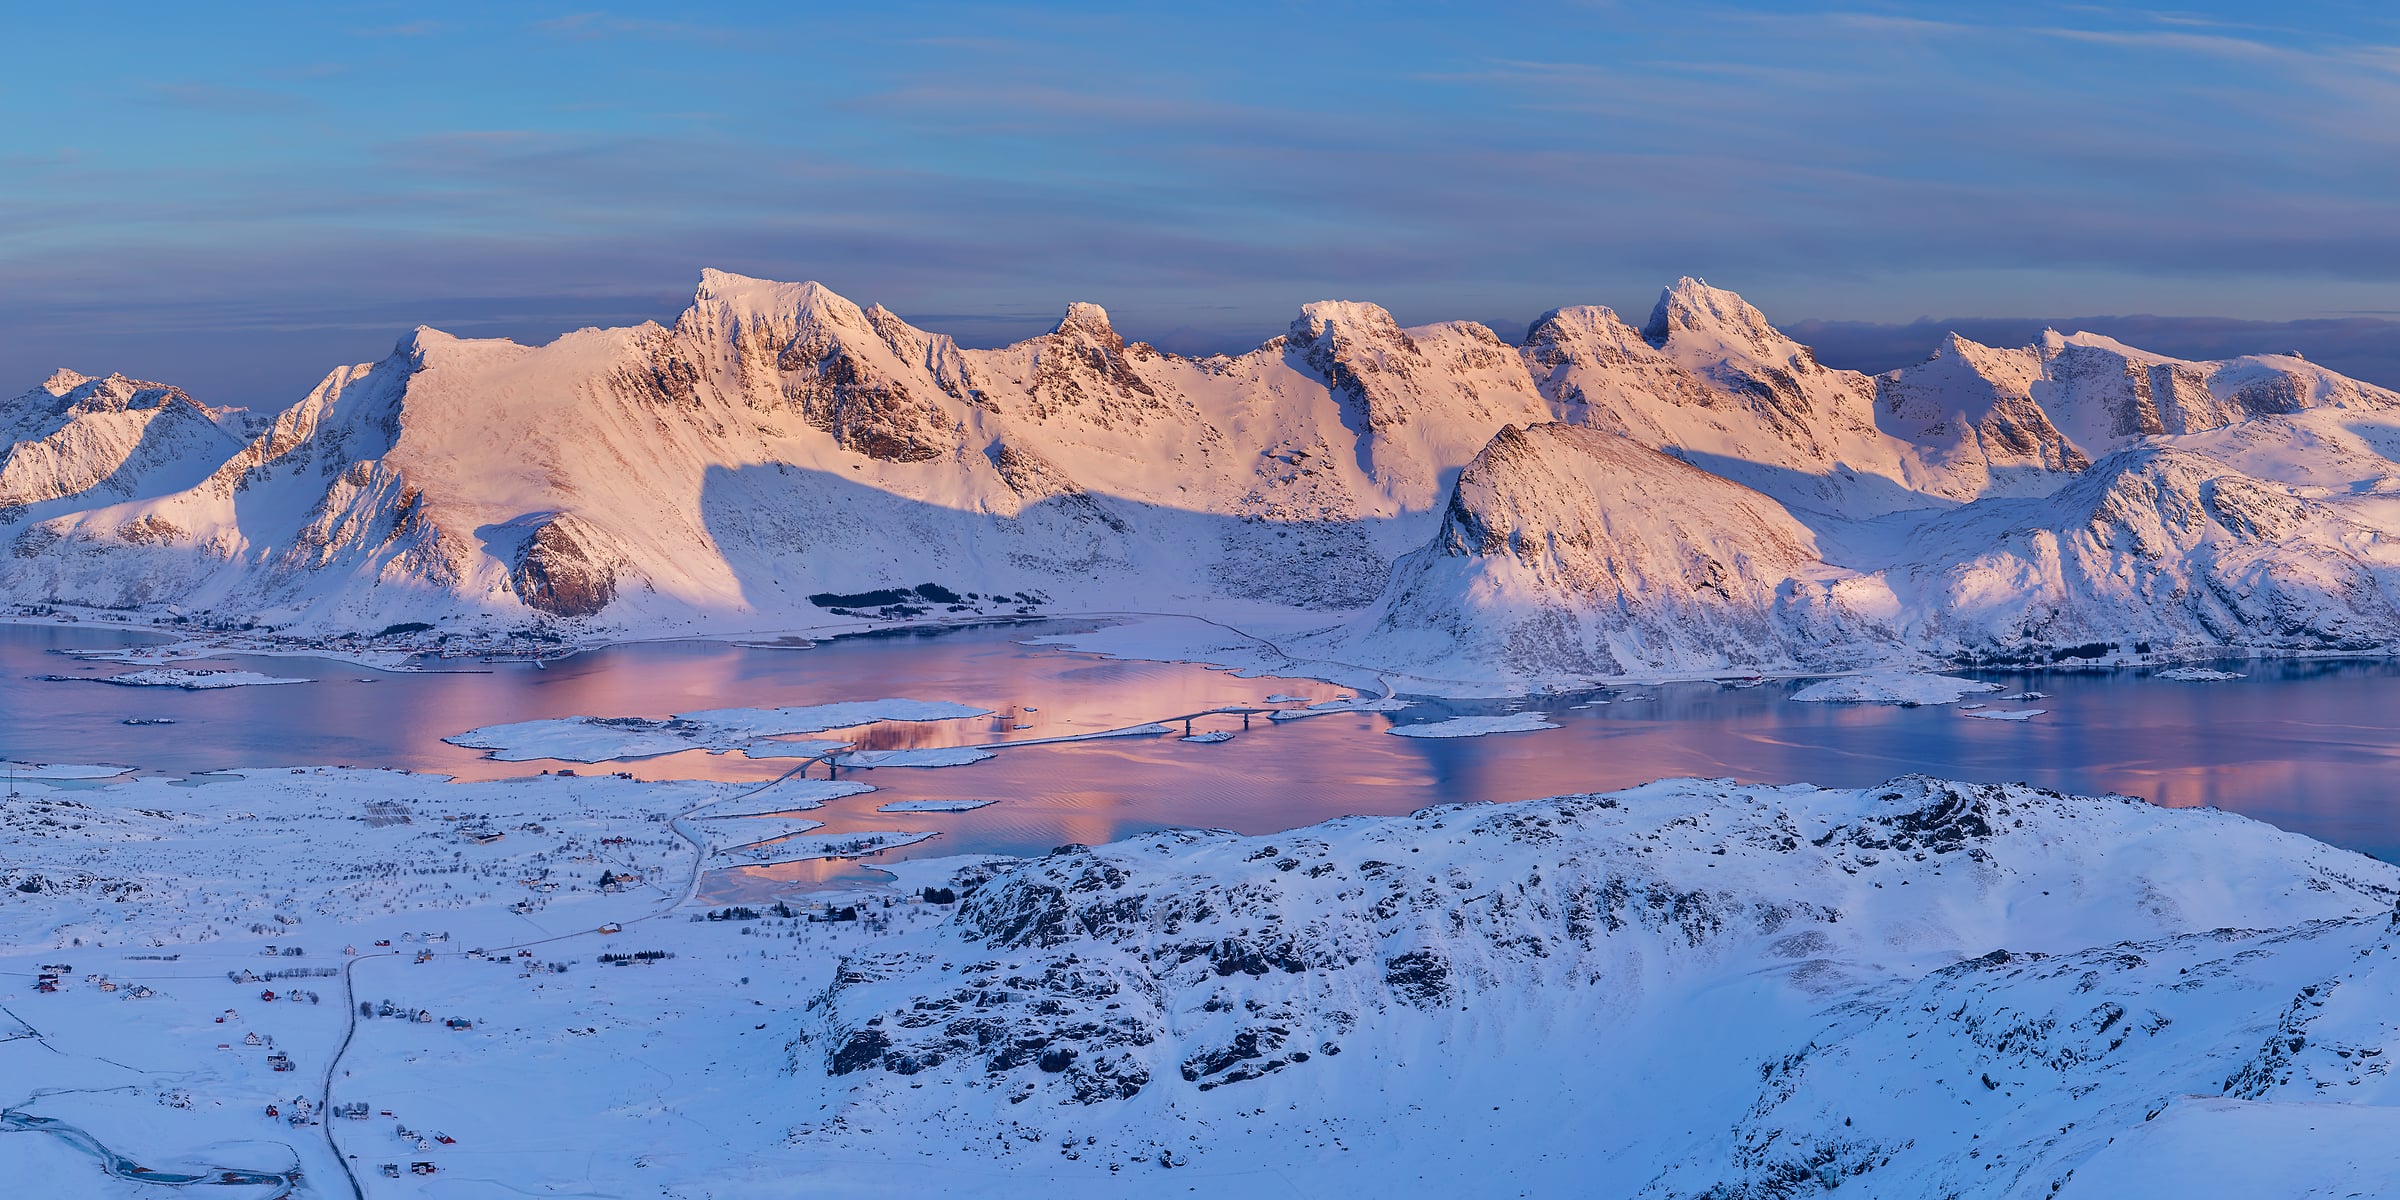 1,375 megapixels! A beautiful mountain landscape scene with snow-covered mountains illuminated by sunset with a river; photograph created by Martin Kulhavy in Ryten Mountain, Lofoten, Norway.